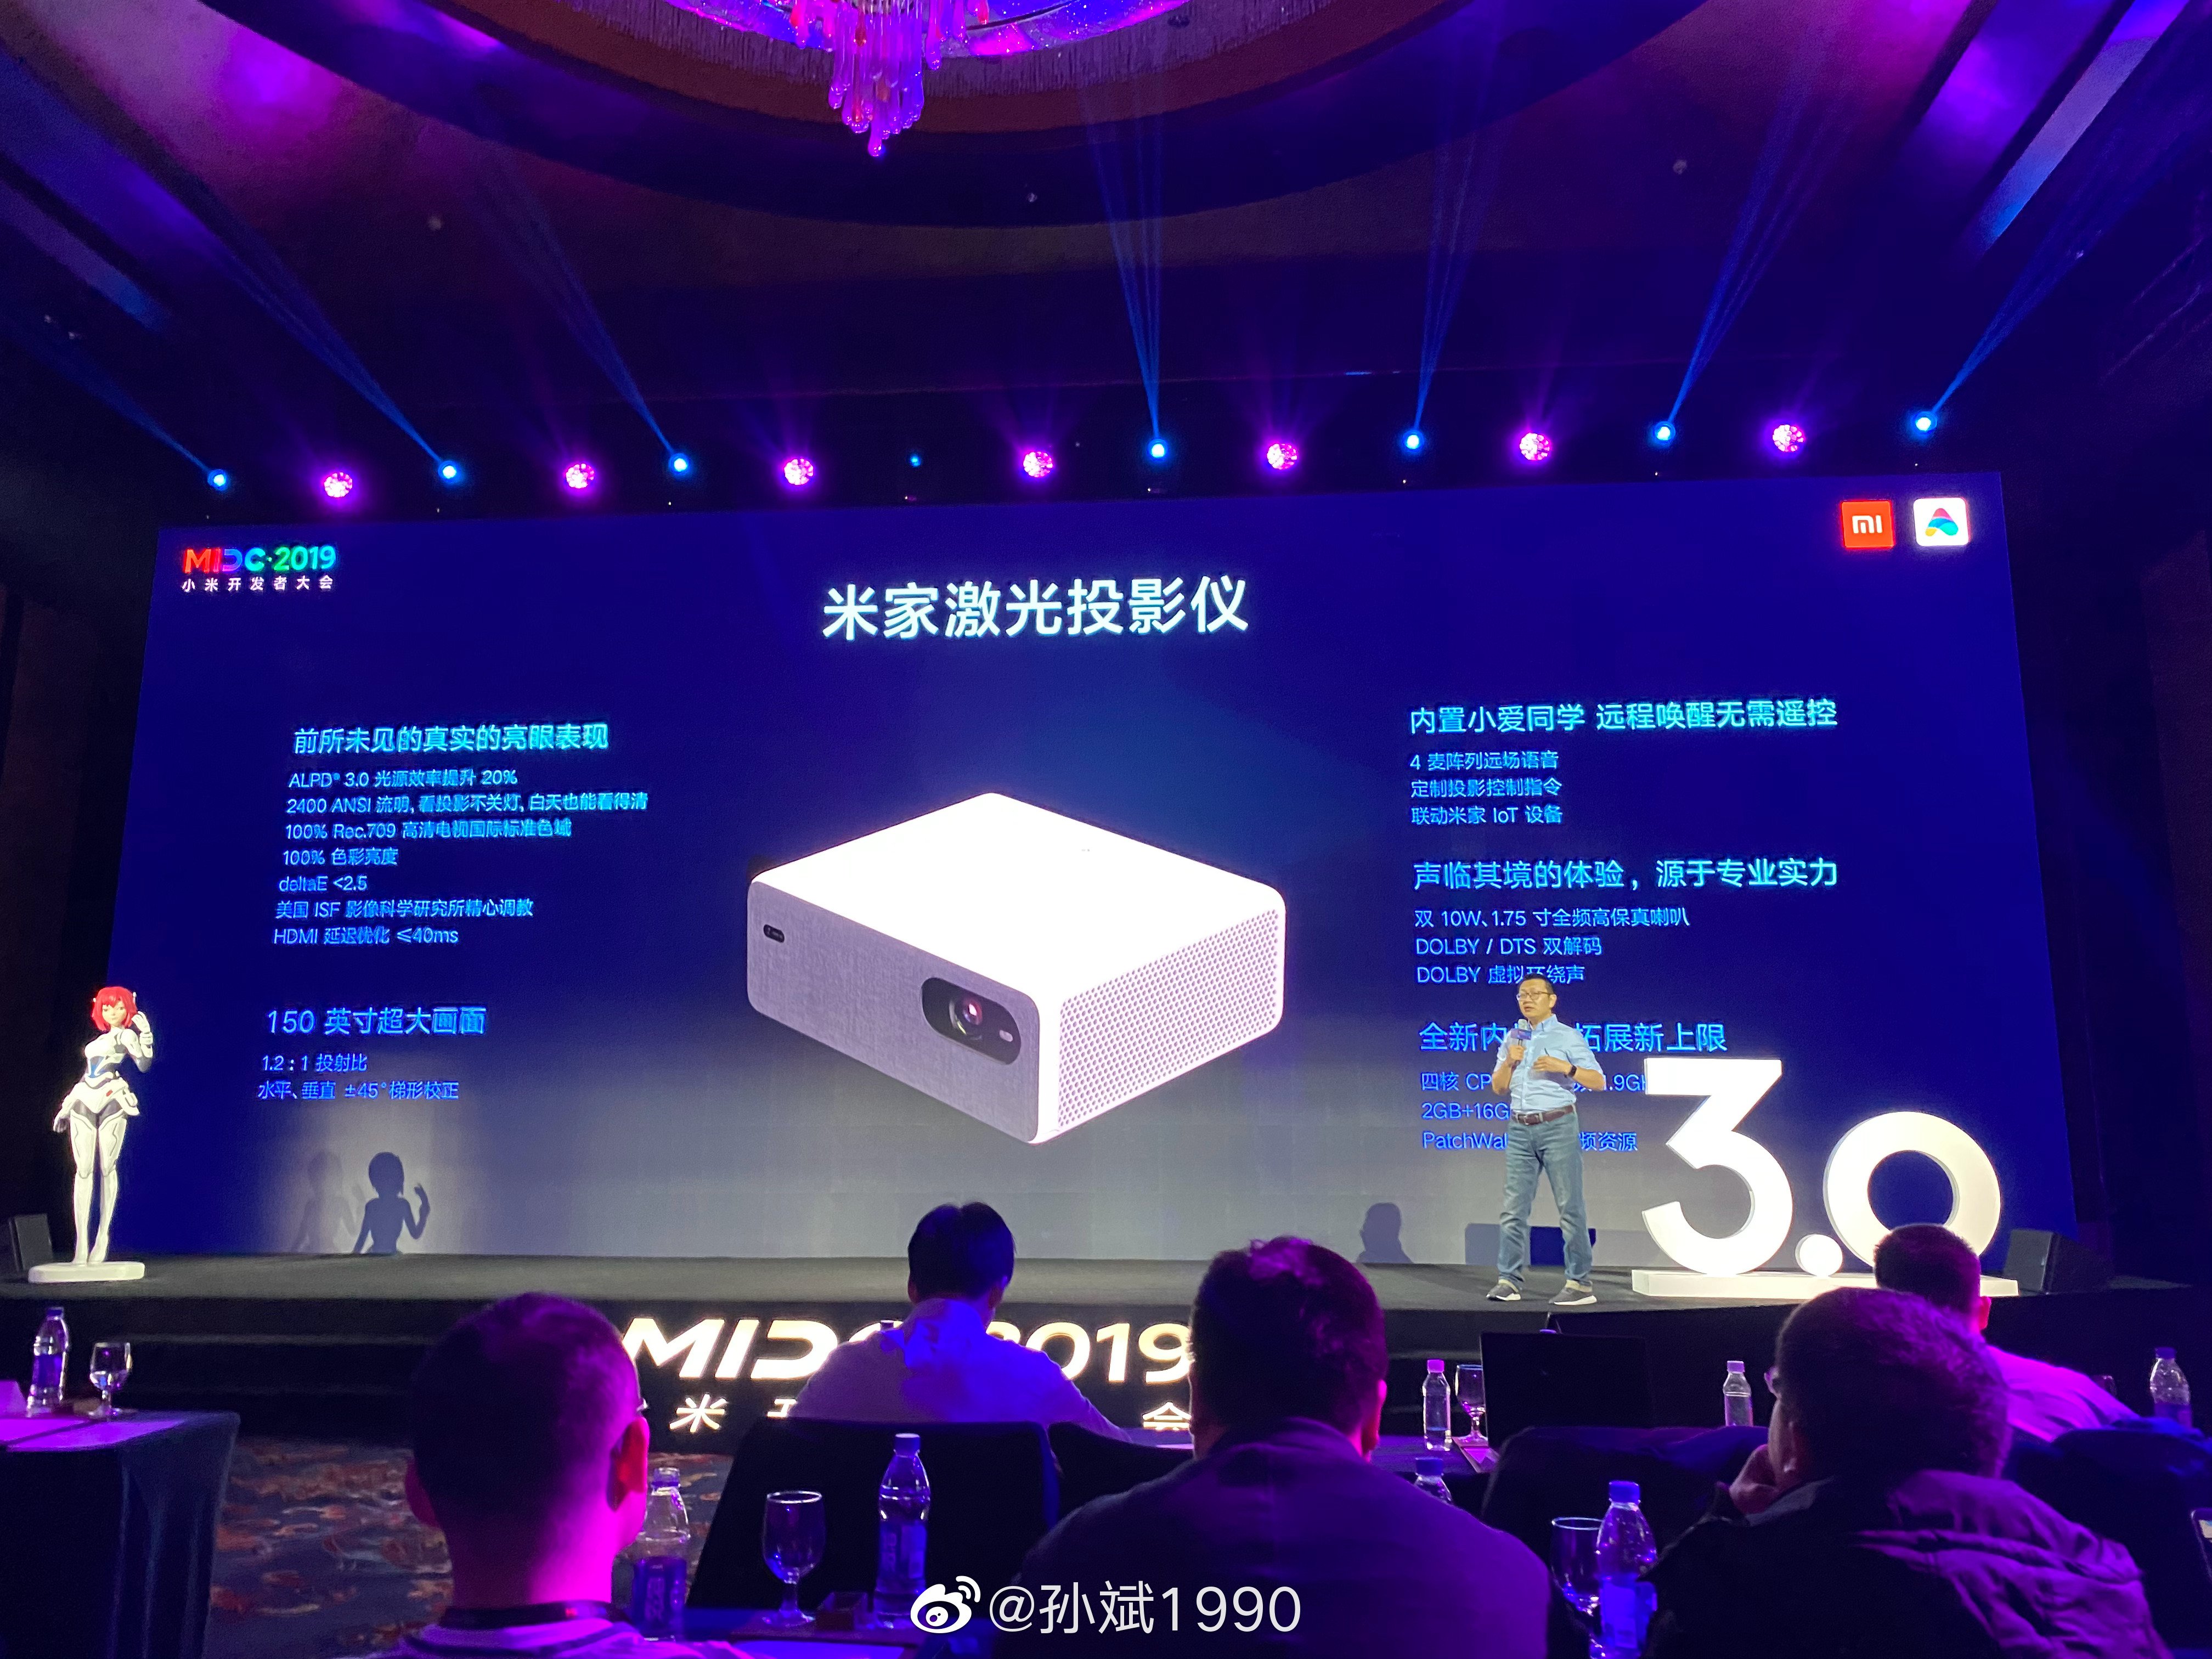 Xiaomi launches Mijia Laser Projector with up to 150-inches 8K